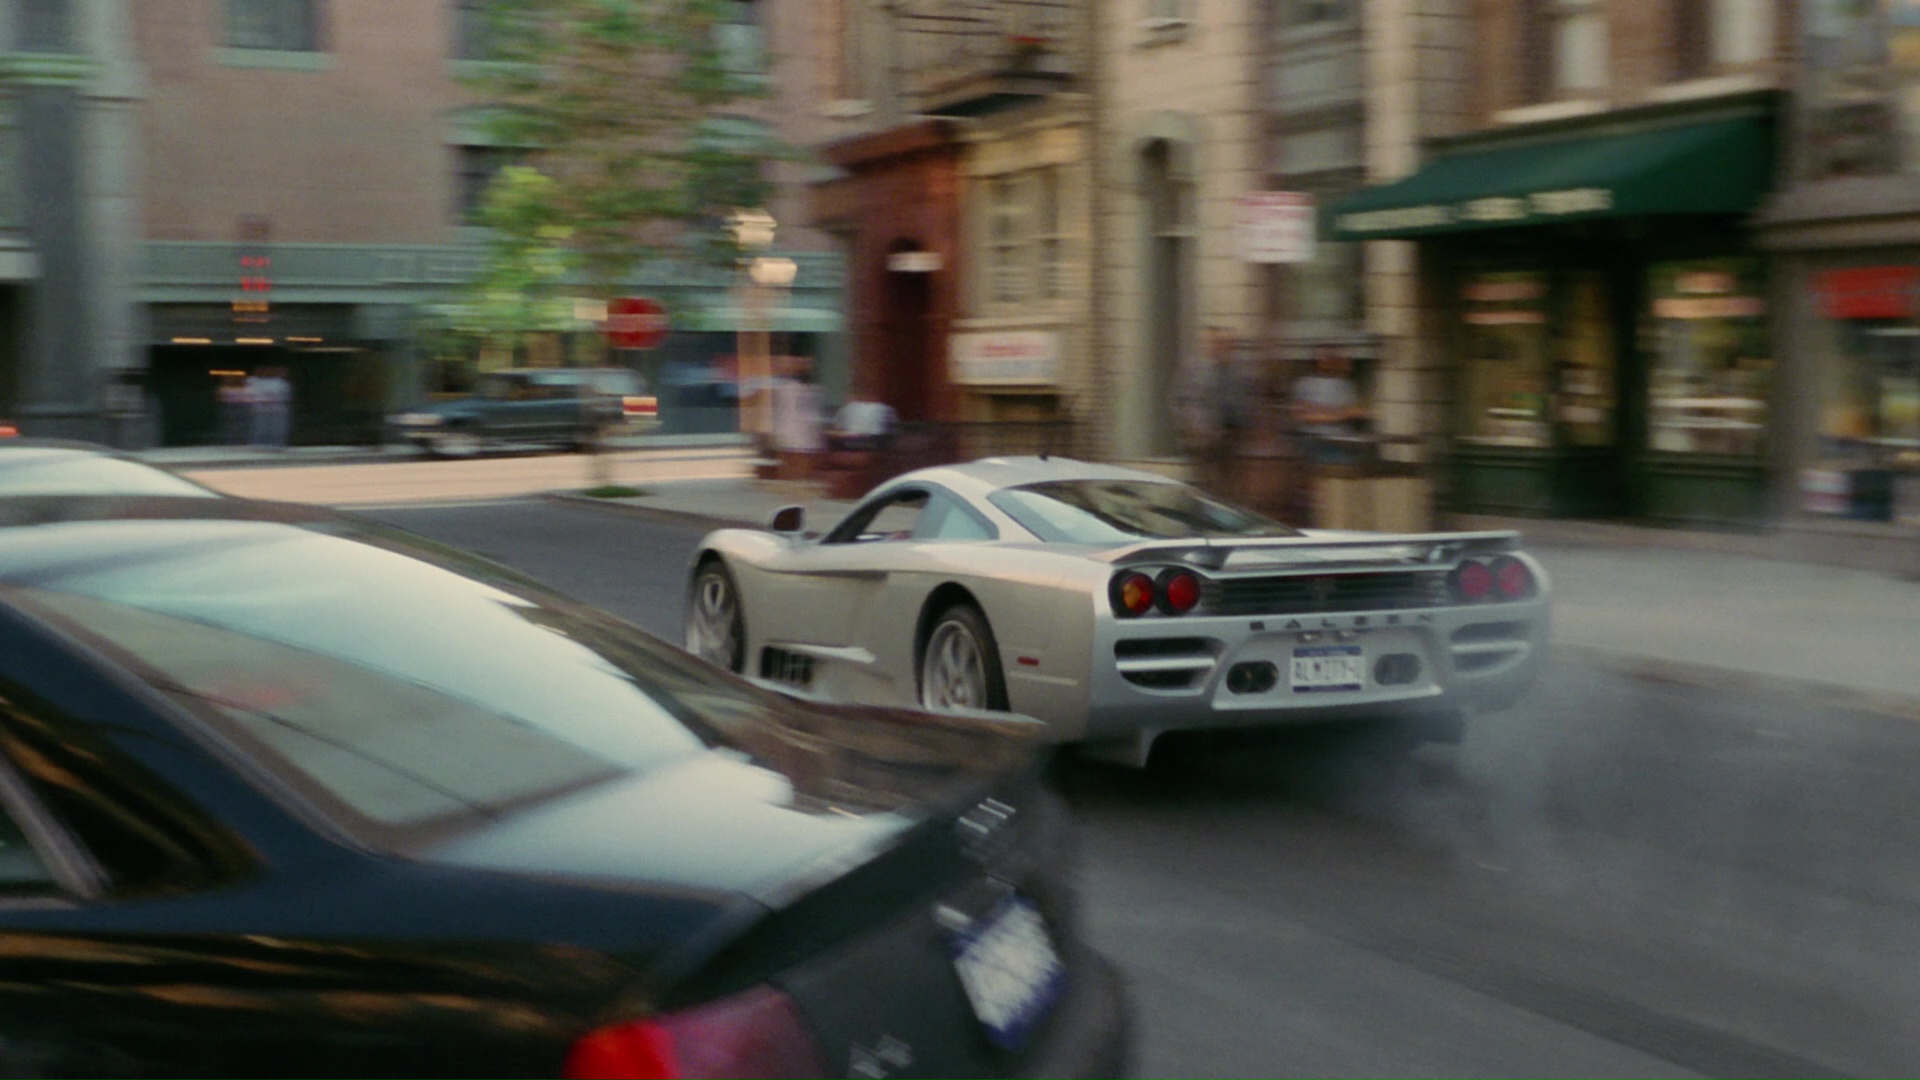 Saleen S7 American Hand-Built, High-Performance Supercar Used by Jim Carrey in Bruce ...1920 x 1080